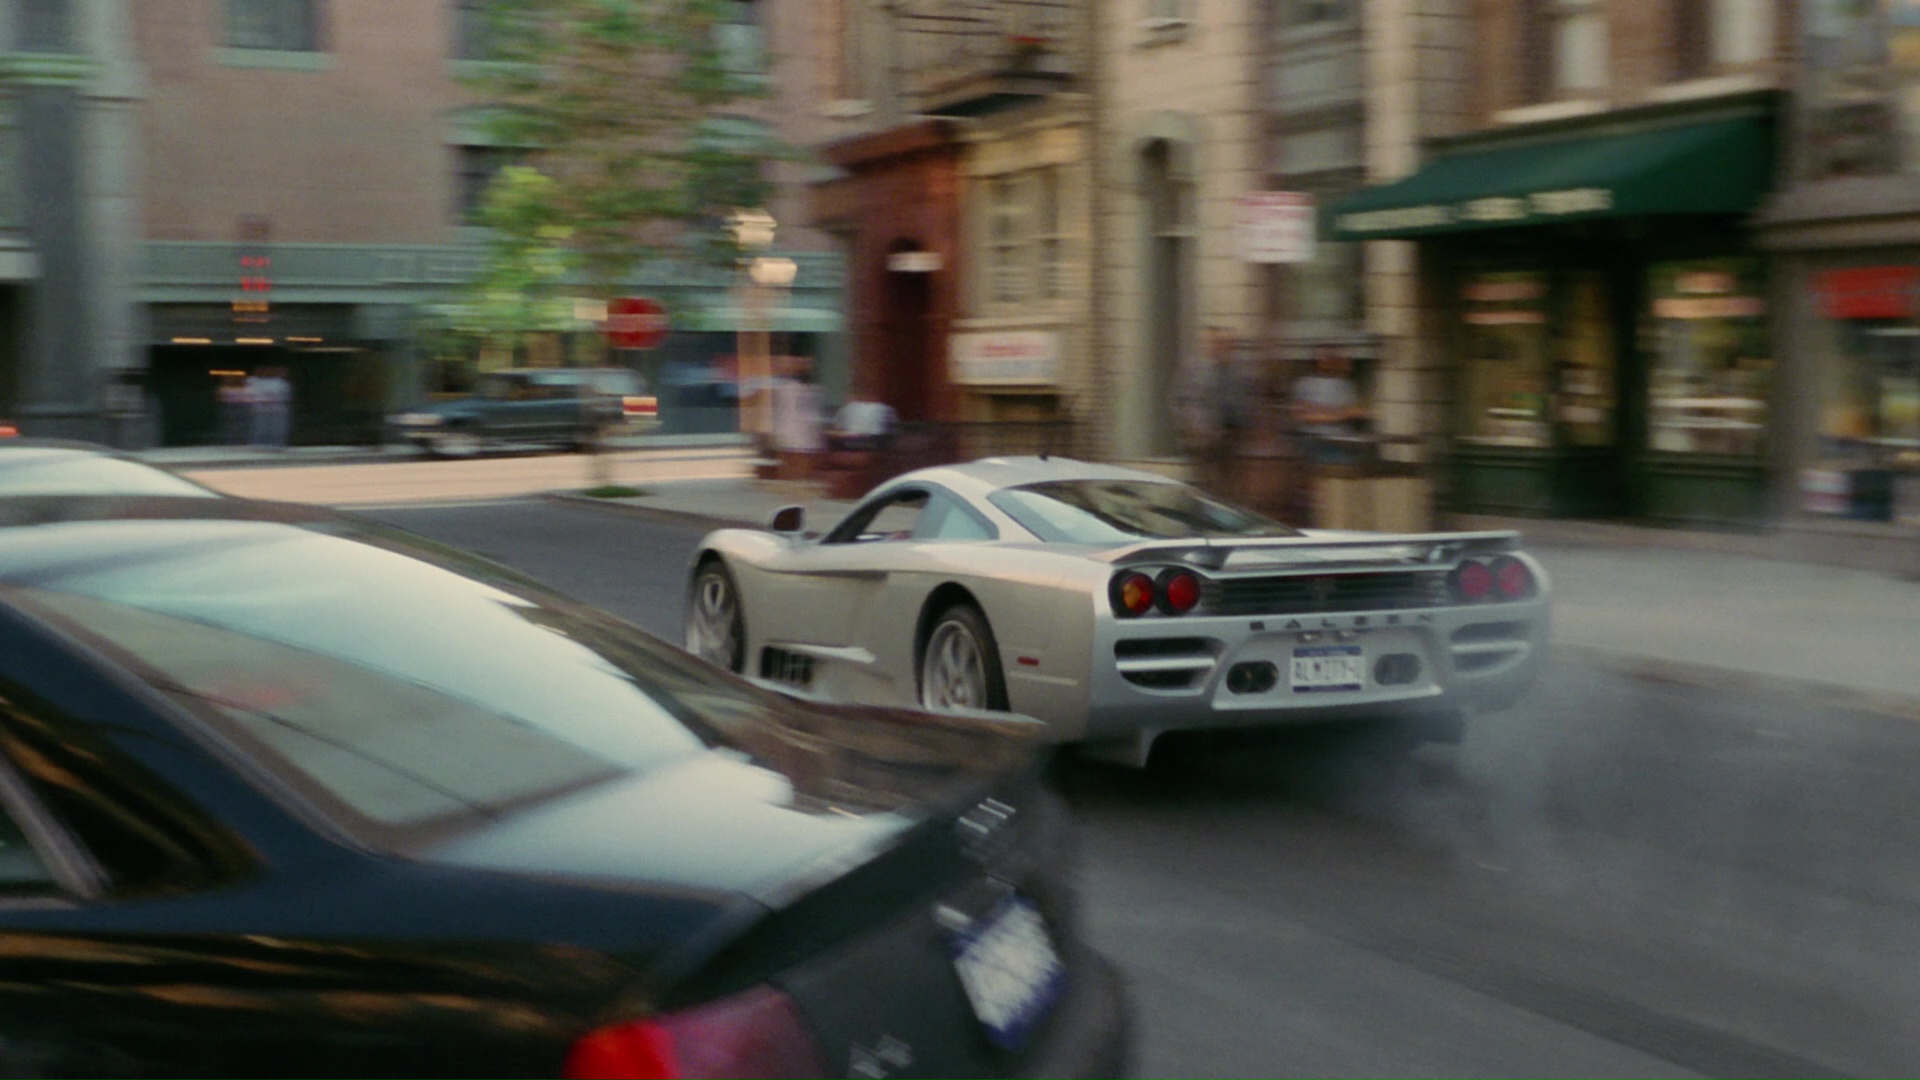 Saleen S7 American Hand-Built, High-Performance Supercar Used by Jim Carrey in Bruce ...1920 x 1080